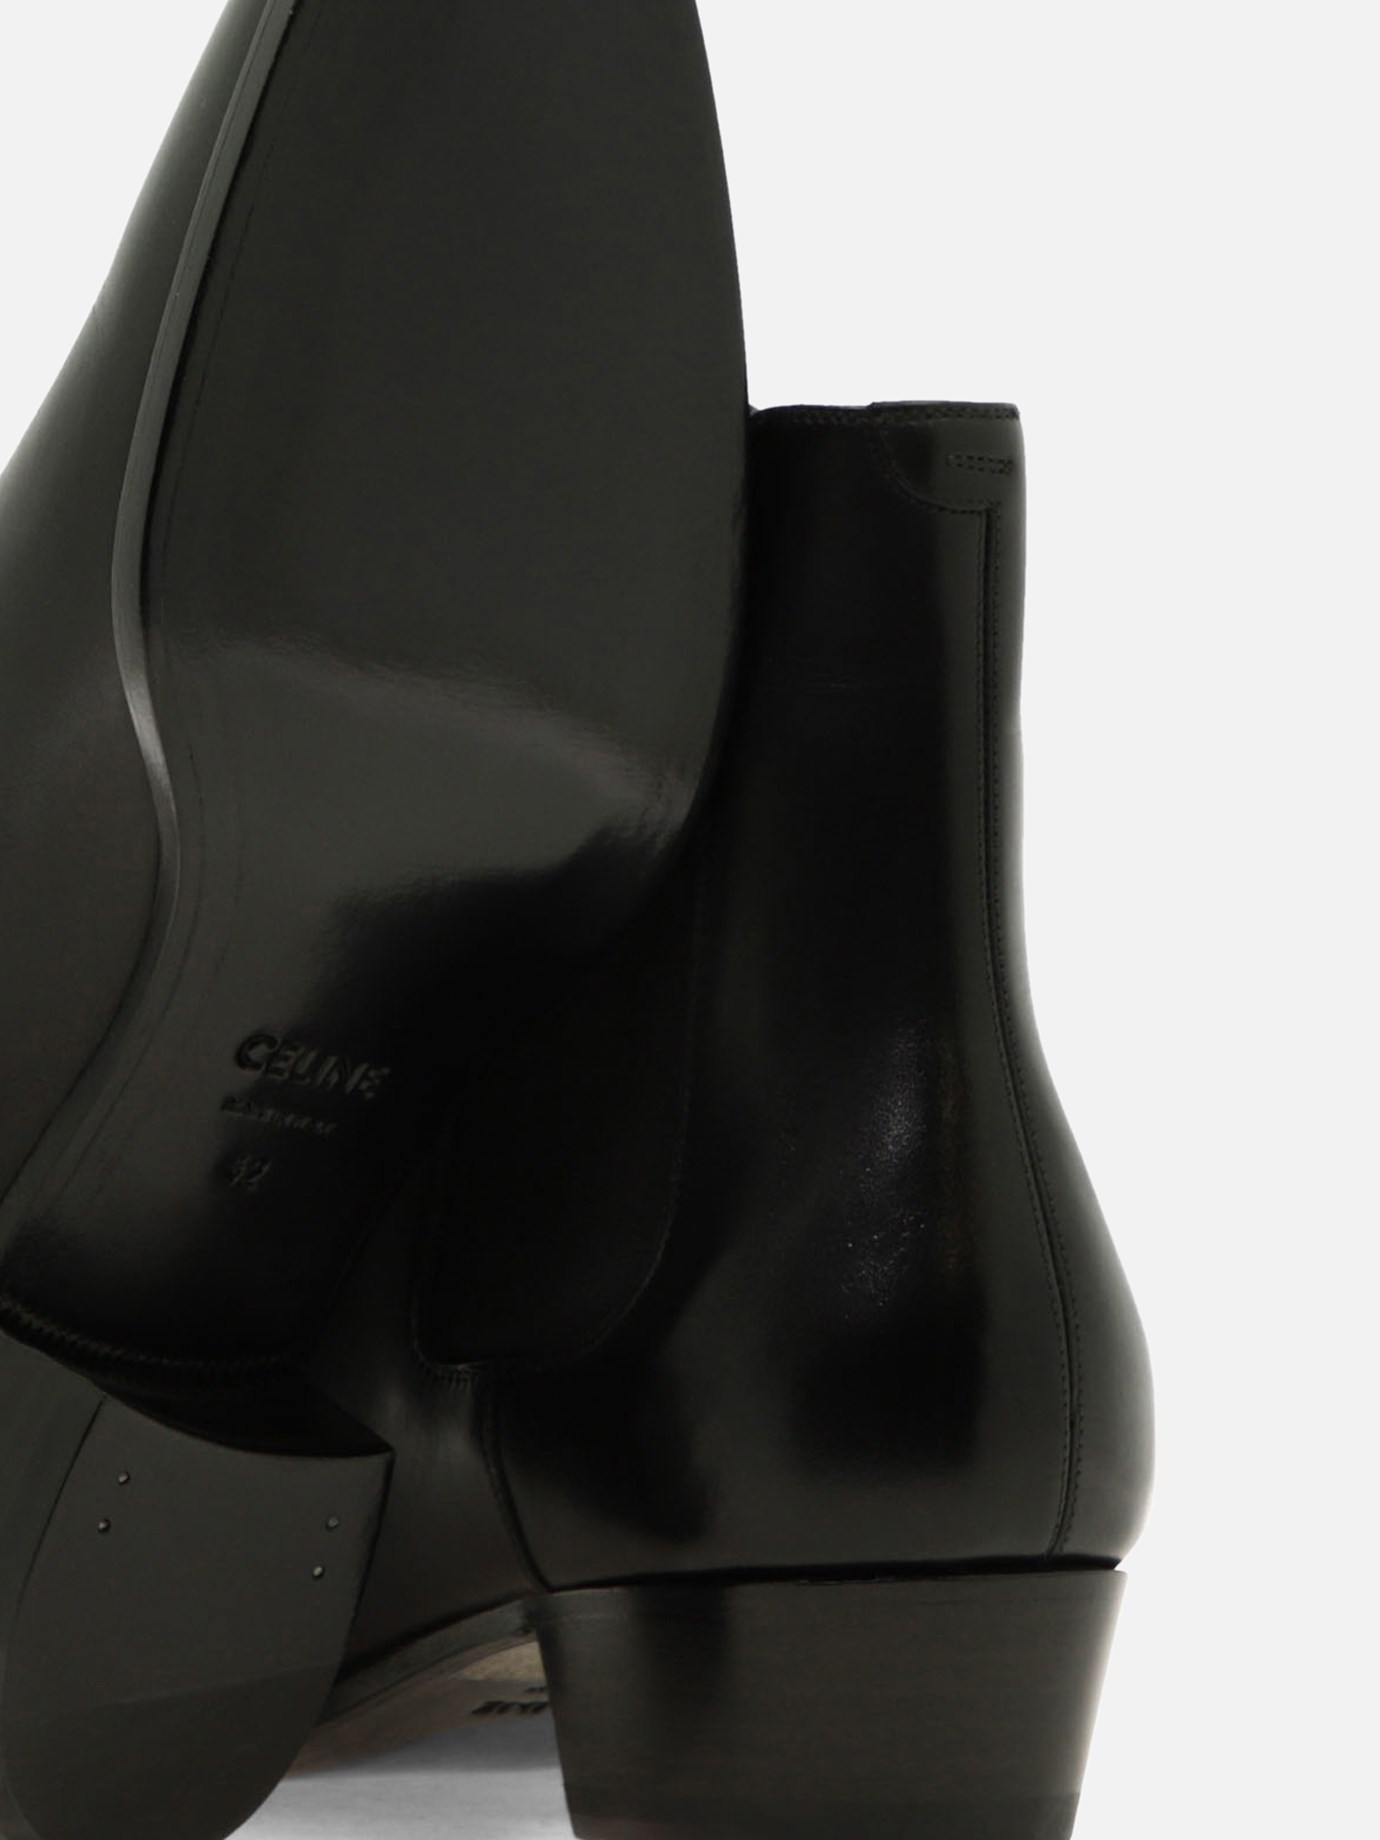  Chelsea  ankle boots by Celine